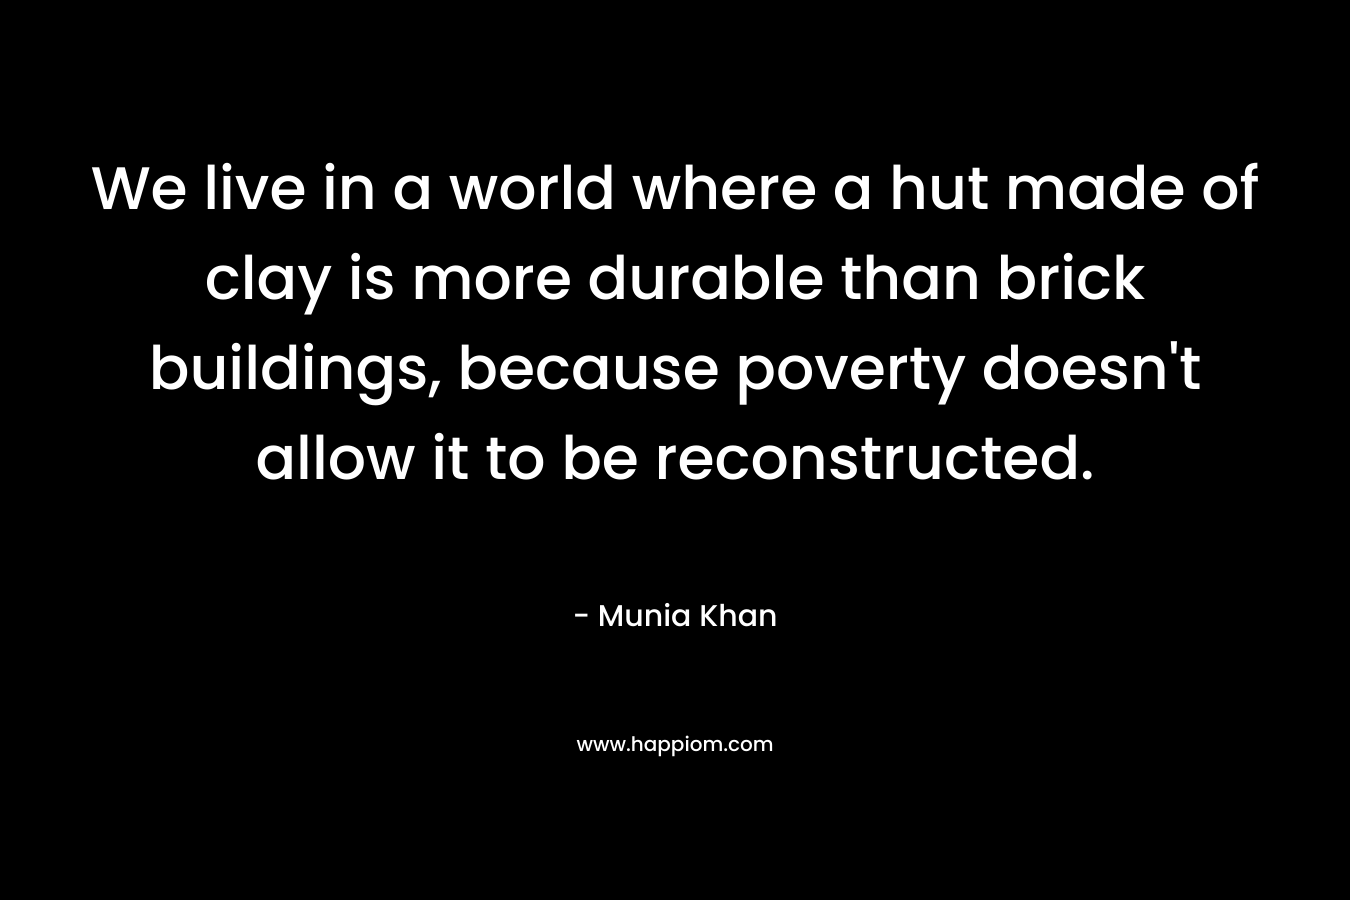 We live in a world where a hut made of clay is more durable than brick buildings, because poverty doesn’t allow it to be reconstructed. – Munia Khan